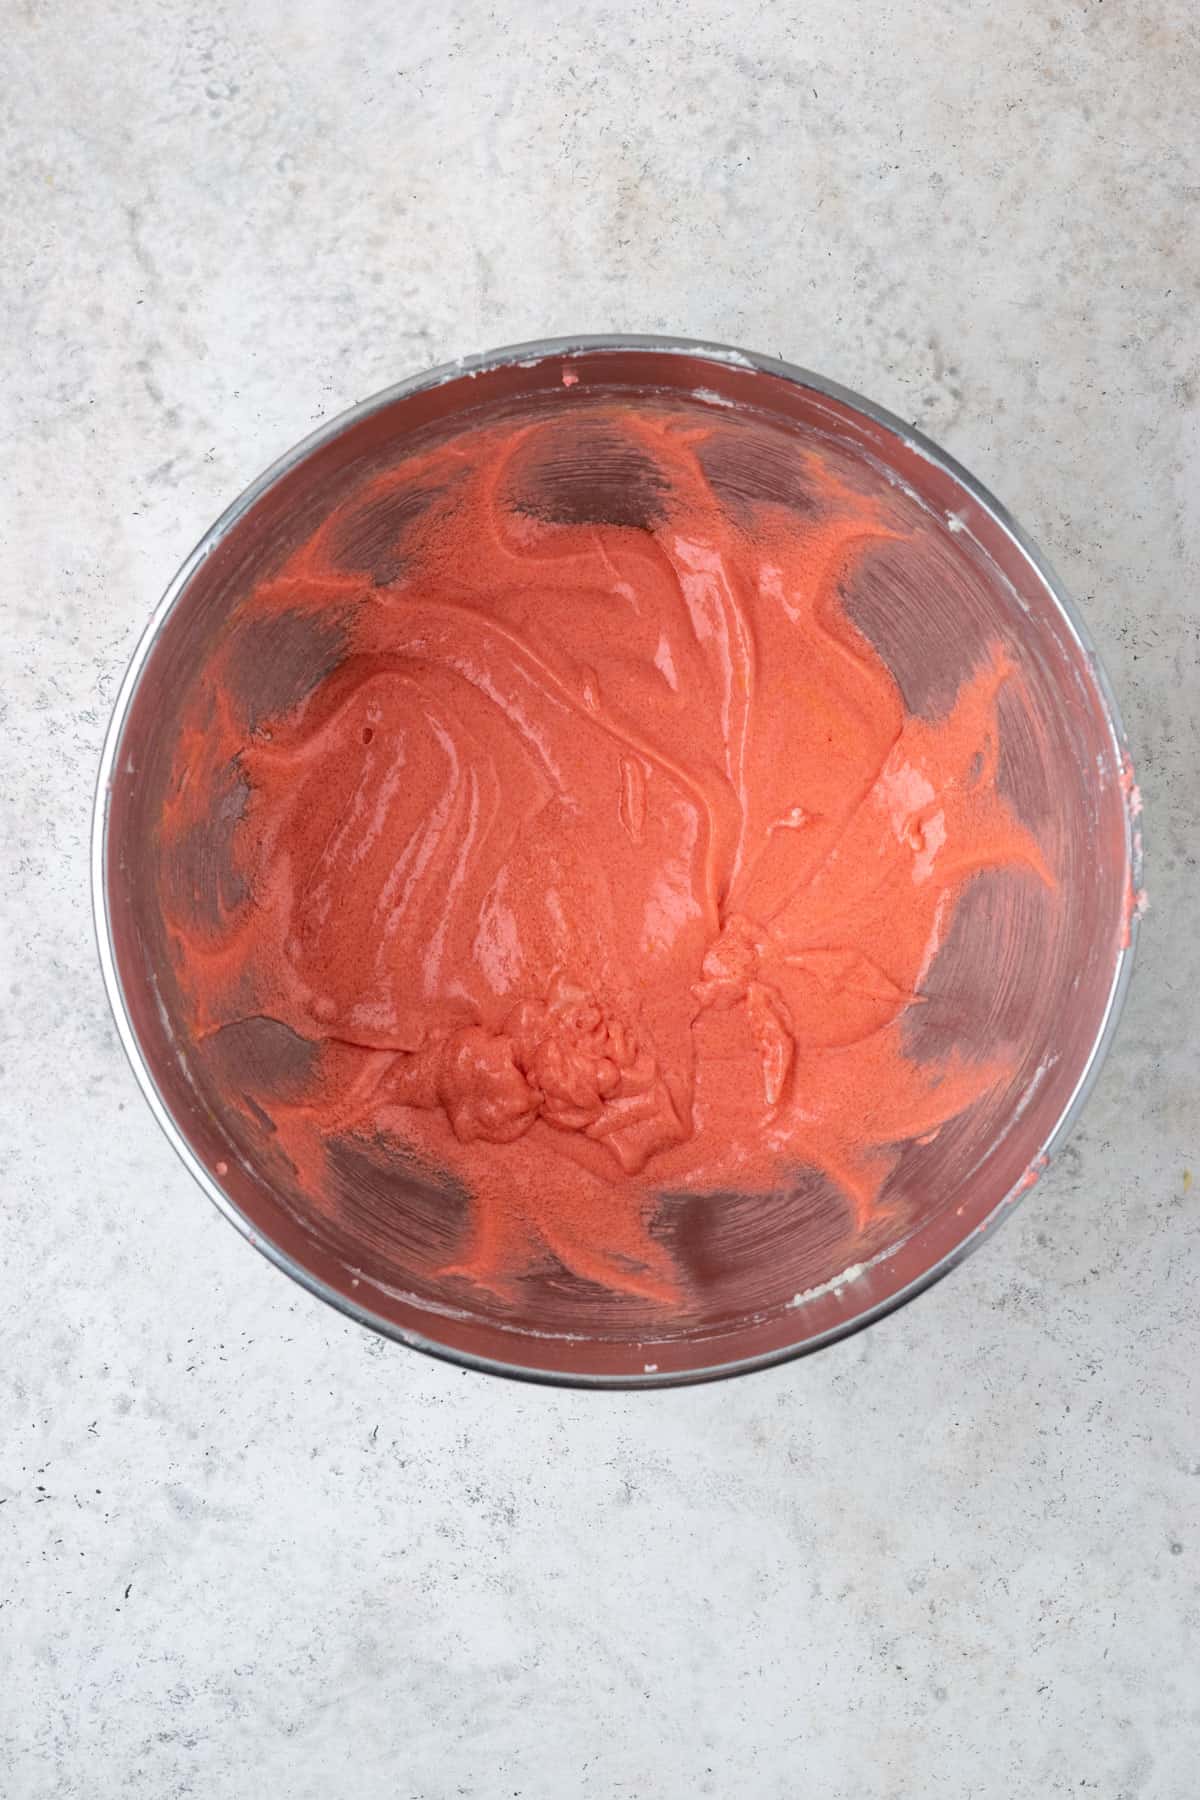 Partially mixed cake batter in a large metal mixing bowl.